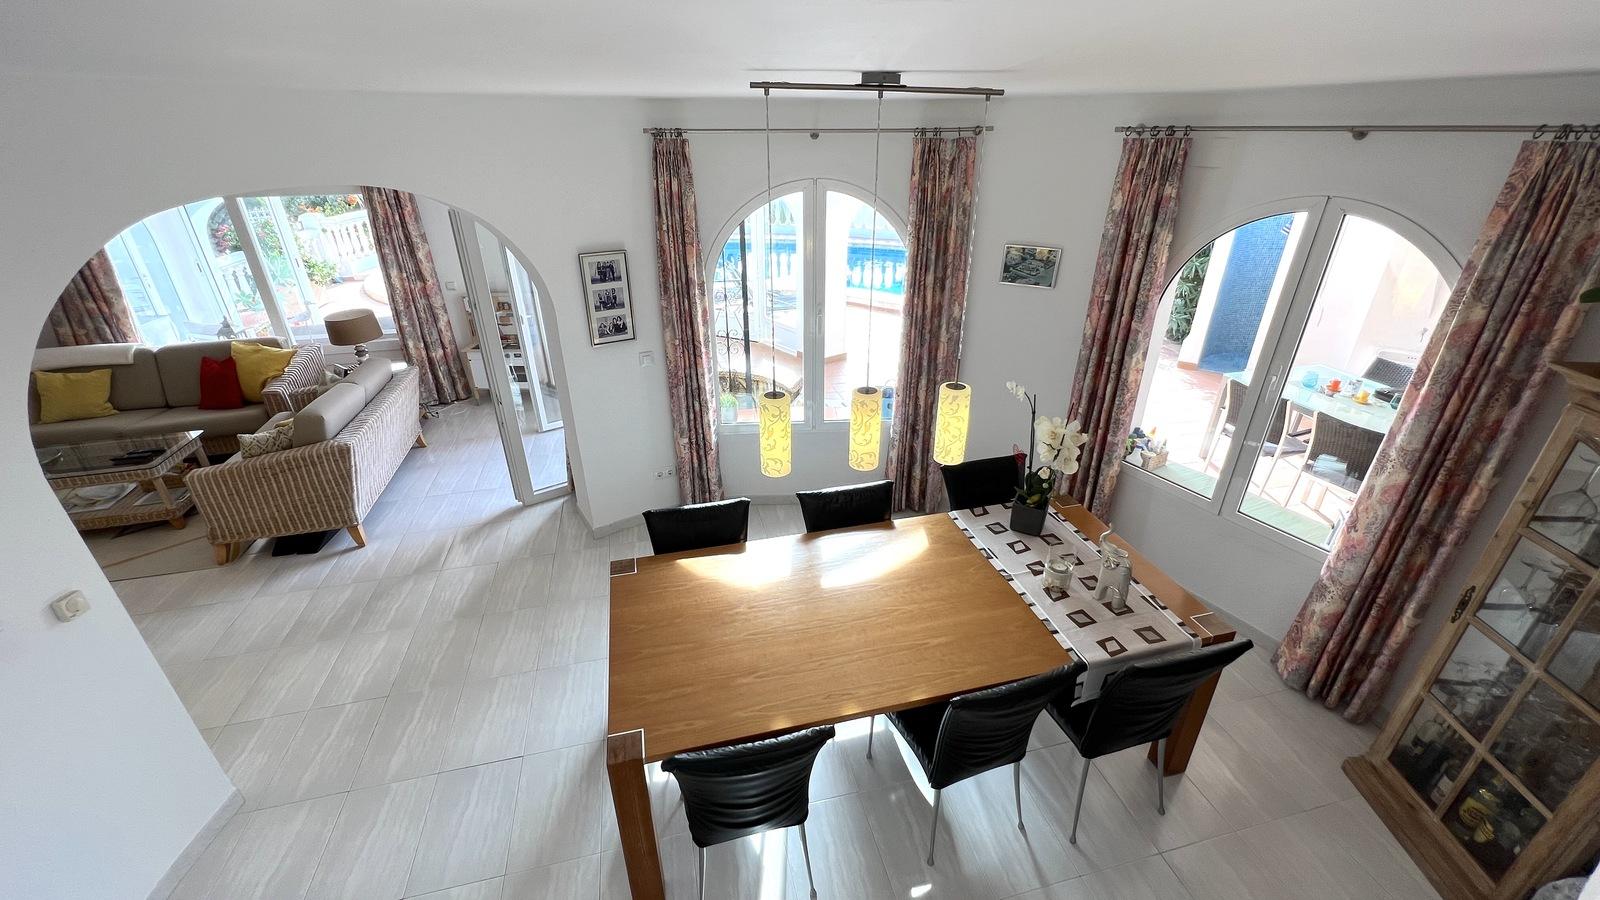 Top maintained villa, quiet and sunny only 200 metres from the sea.